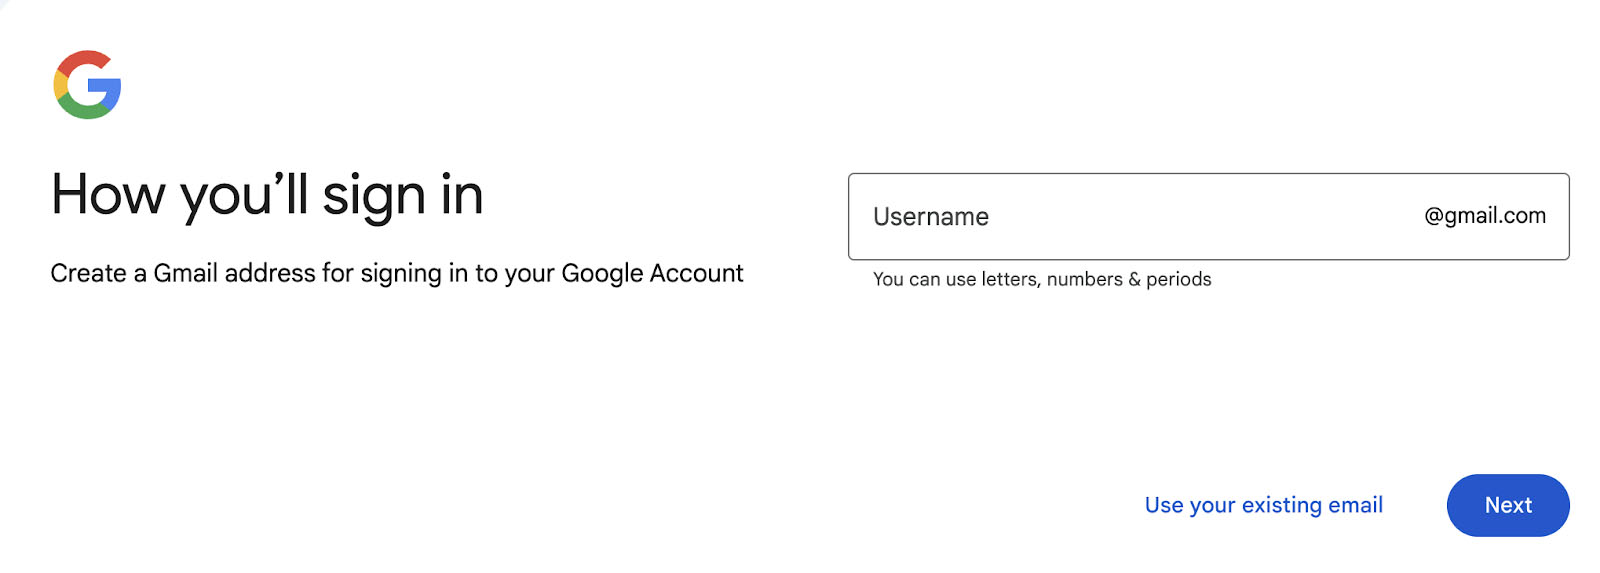 A Google account form field for creating a Gmail address.